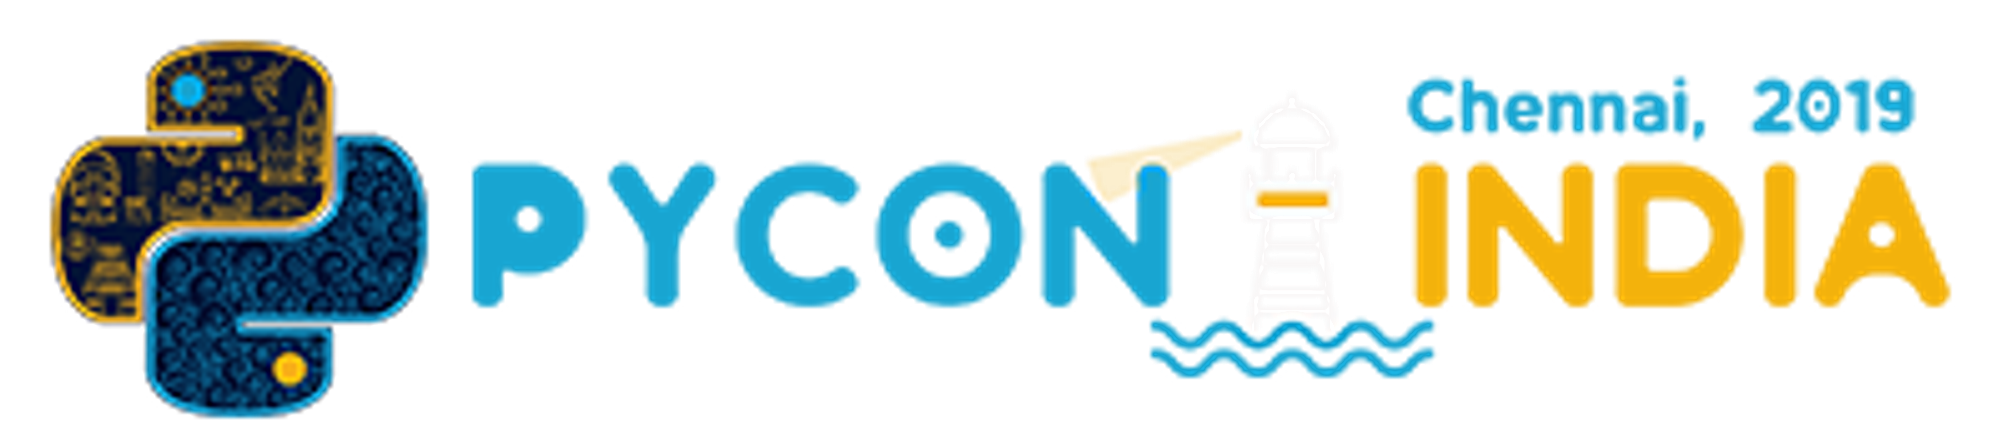 Thank You | PyCon India 2019 in Chennai | October 12th to 15th